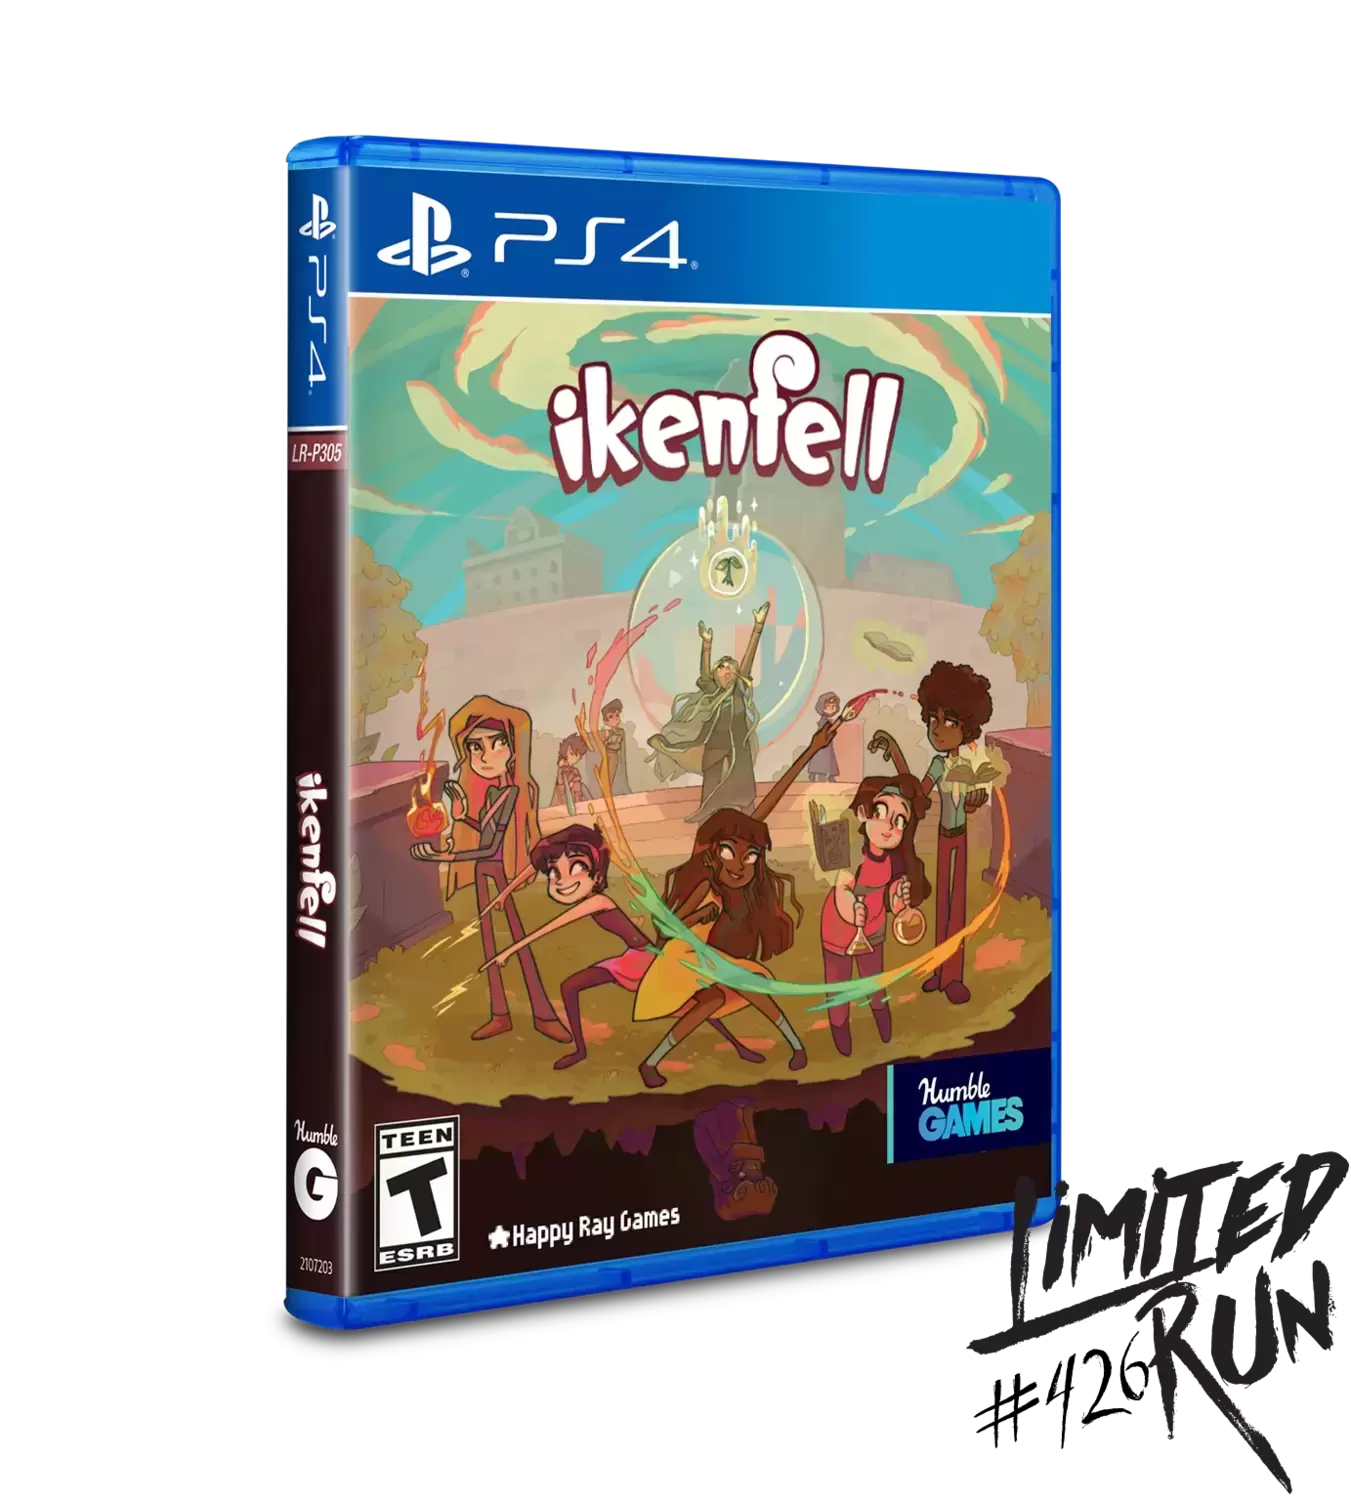 PS4 Games - Ikenfell - Limited Run Games